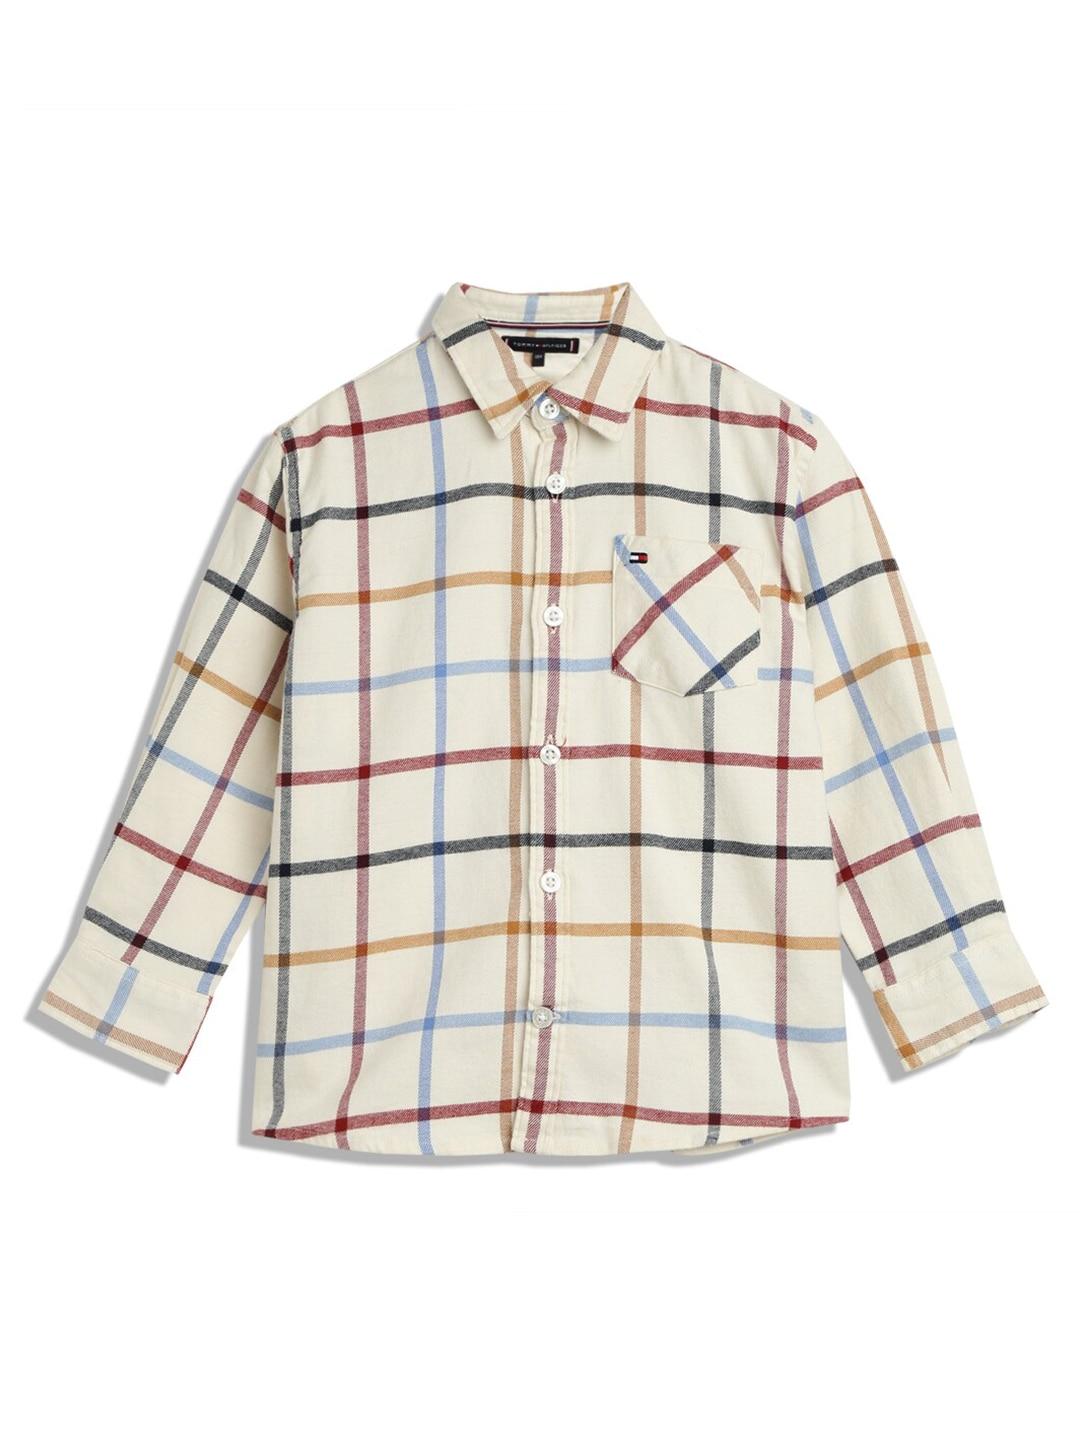 Tommy Hilfiger Boys Spread Collar Checked Casual Cotton Shirt